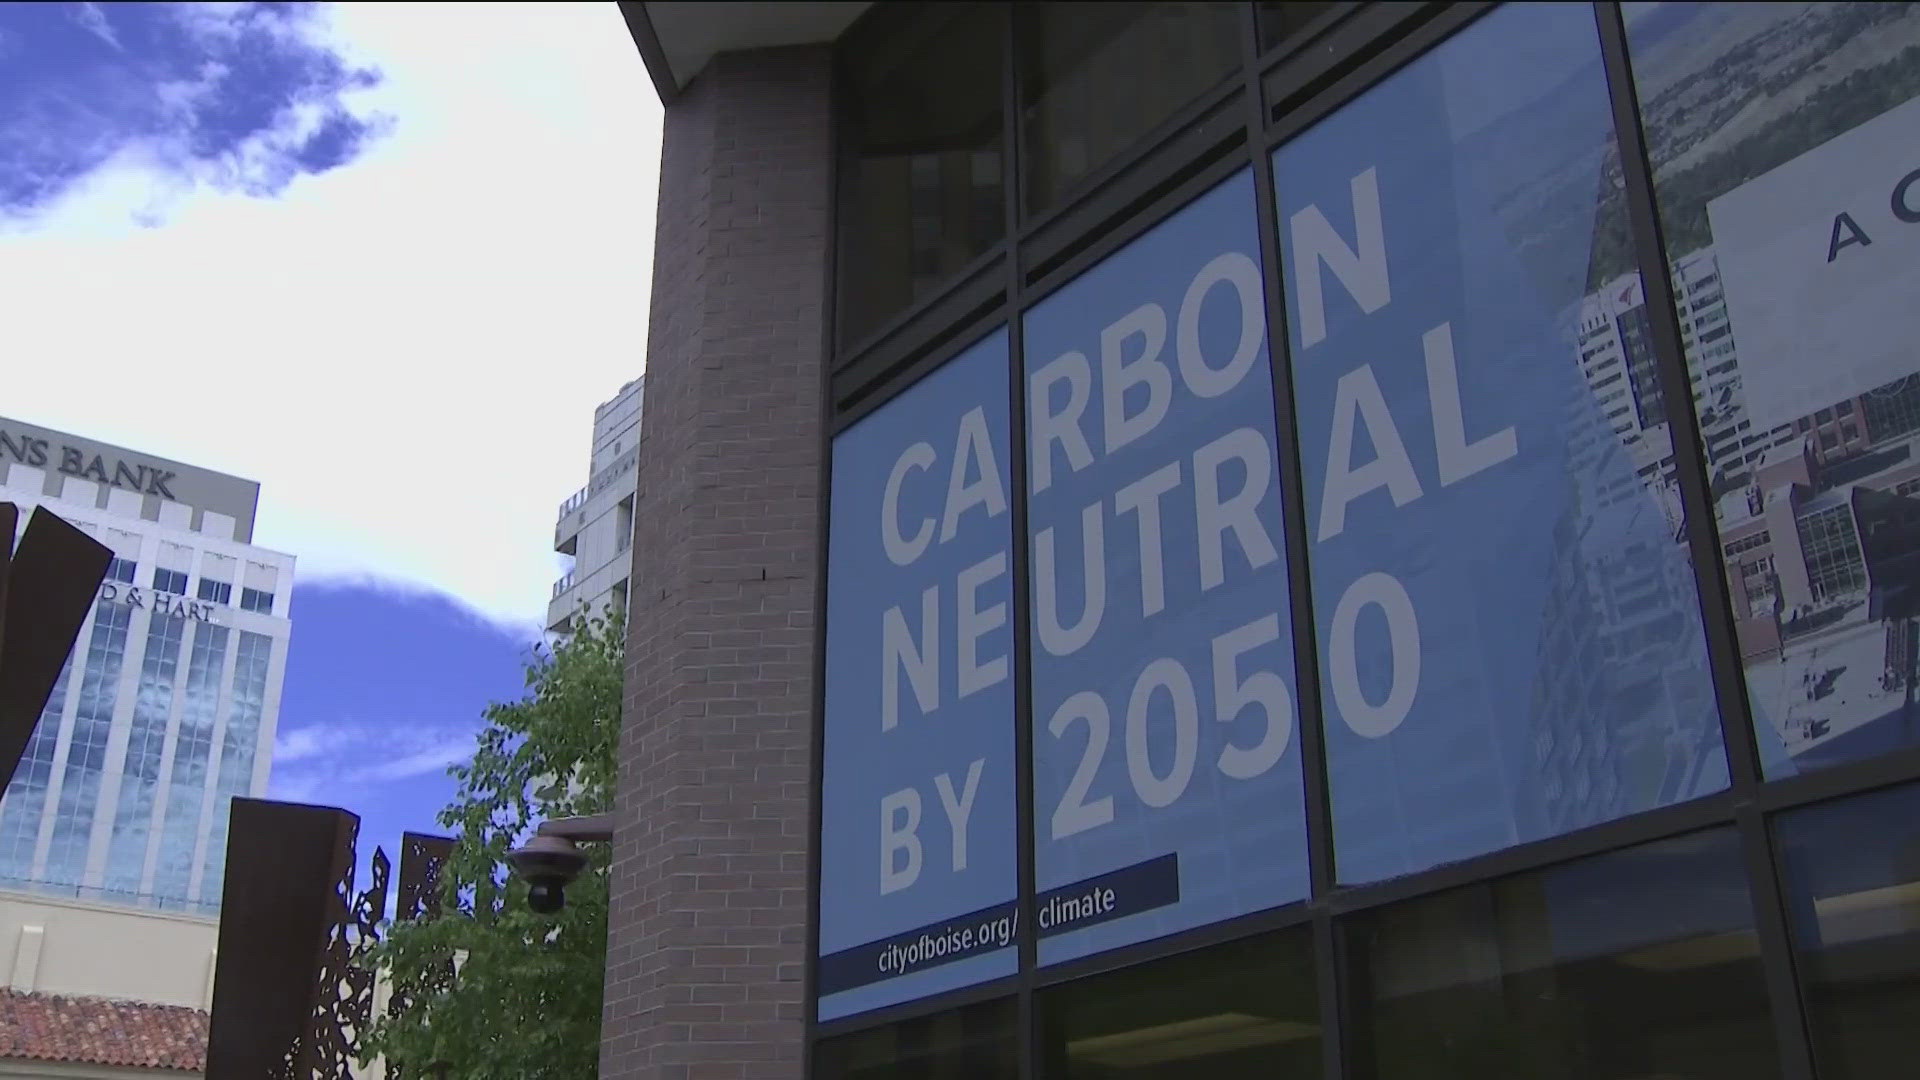 In 2021, the City of Trees developed a plan to go carbon neutral, but what does "carbon neutral" mean?